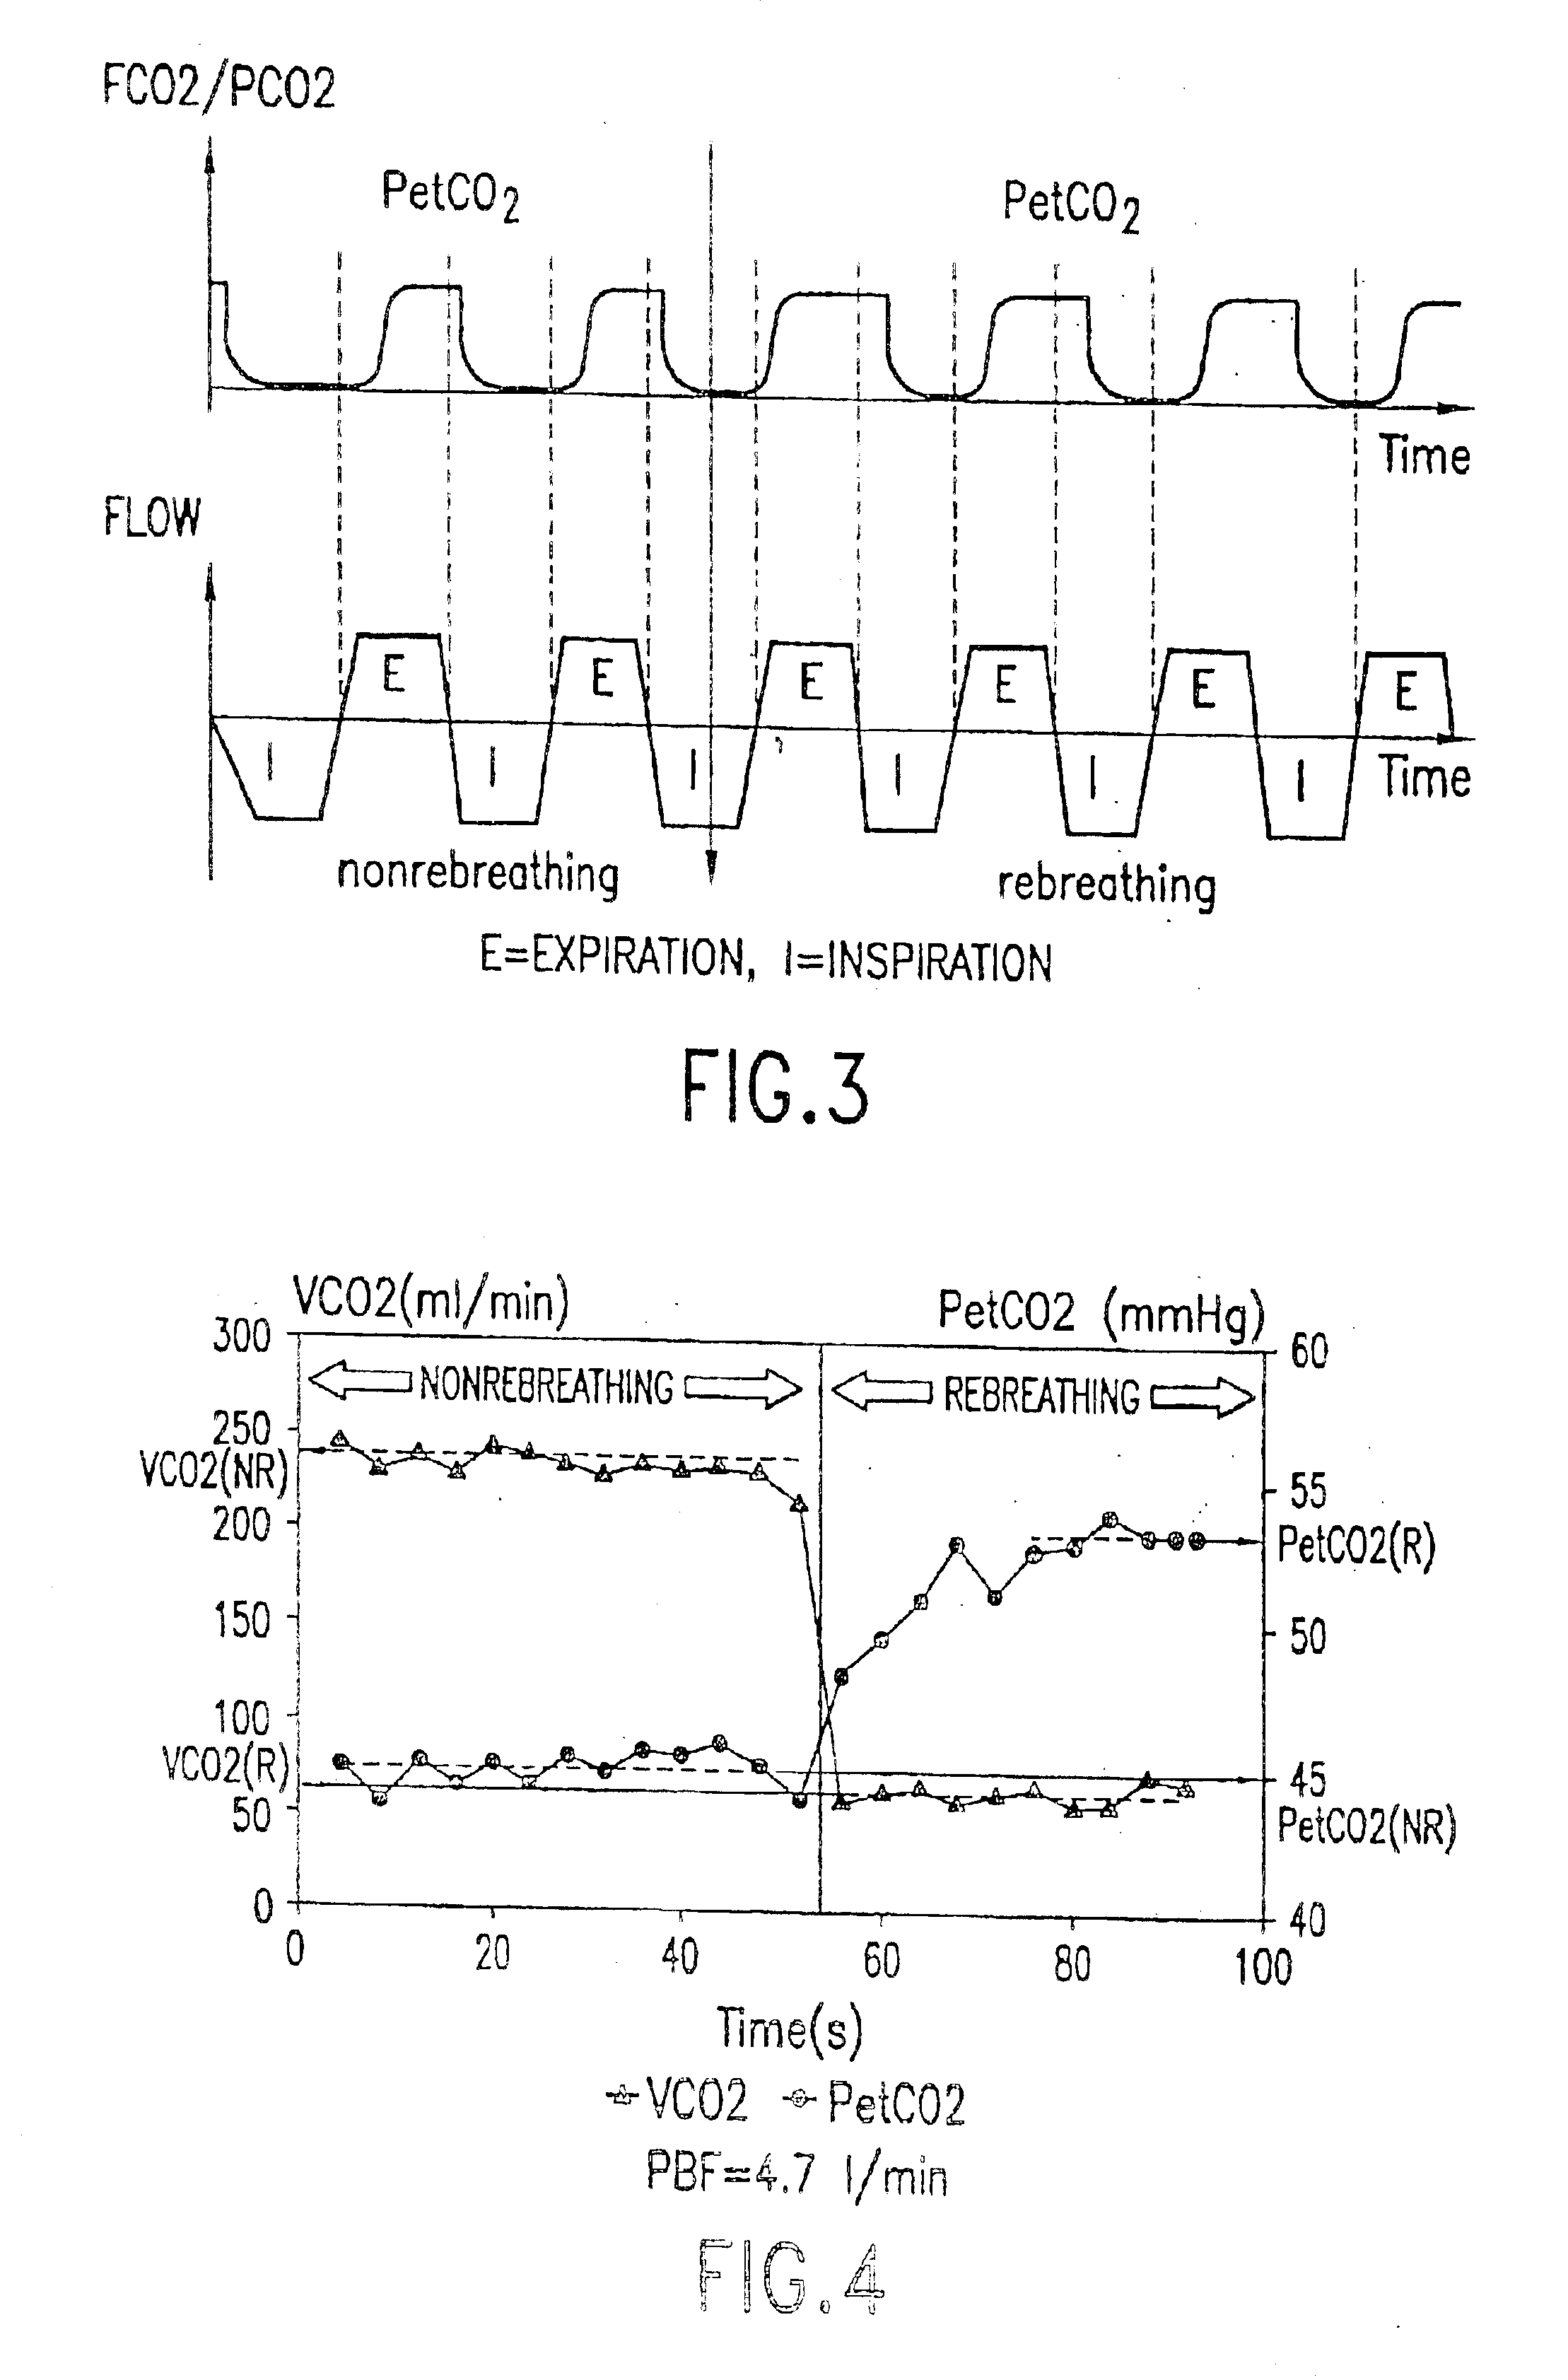 Arrangement for the determination of the effective pulmonary blood flow